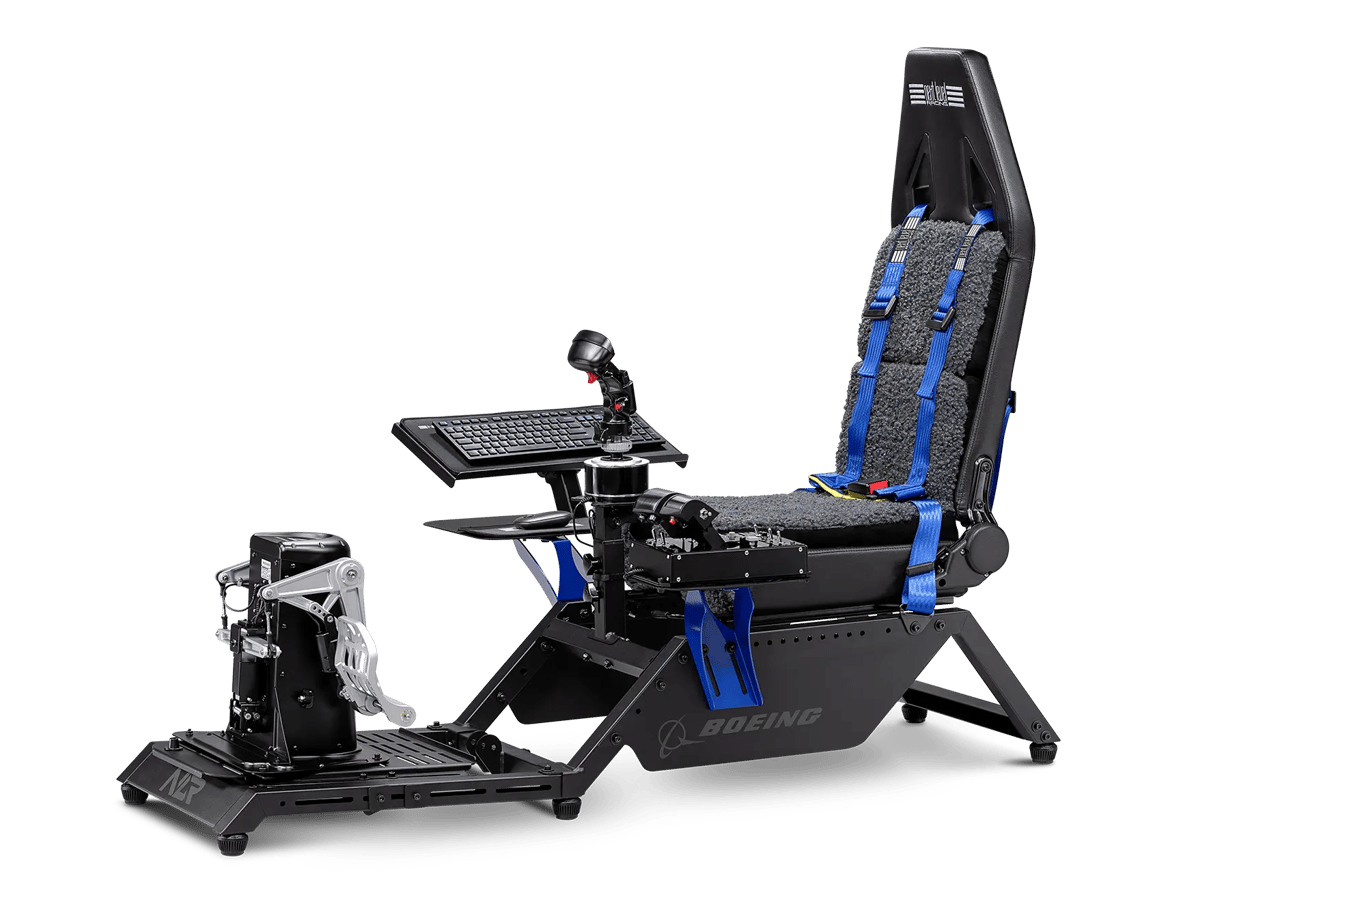 Next Level Racing Flight Simulator: Boeing Commercial Edition  -  ()-5